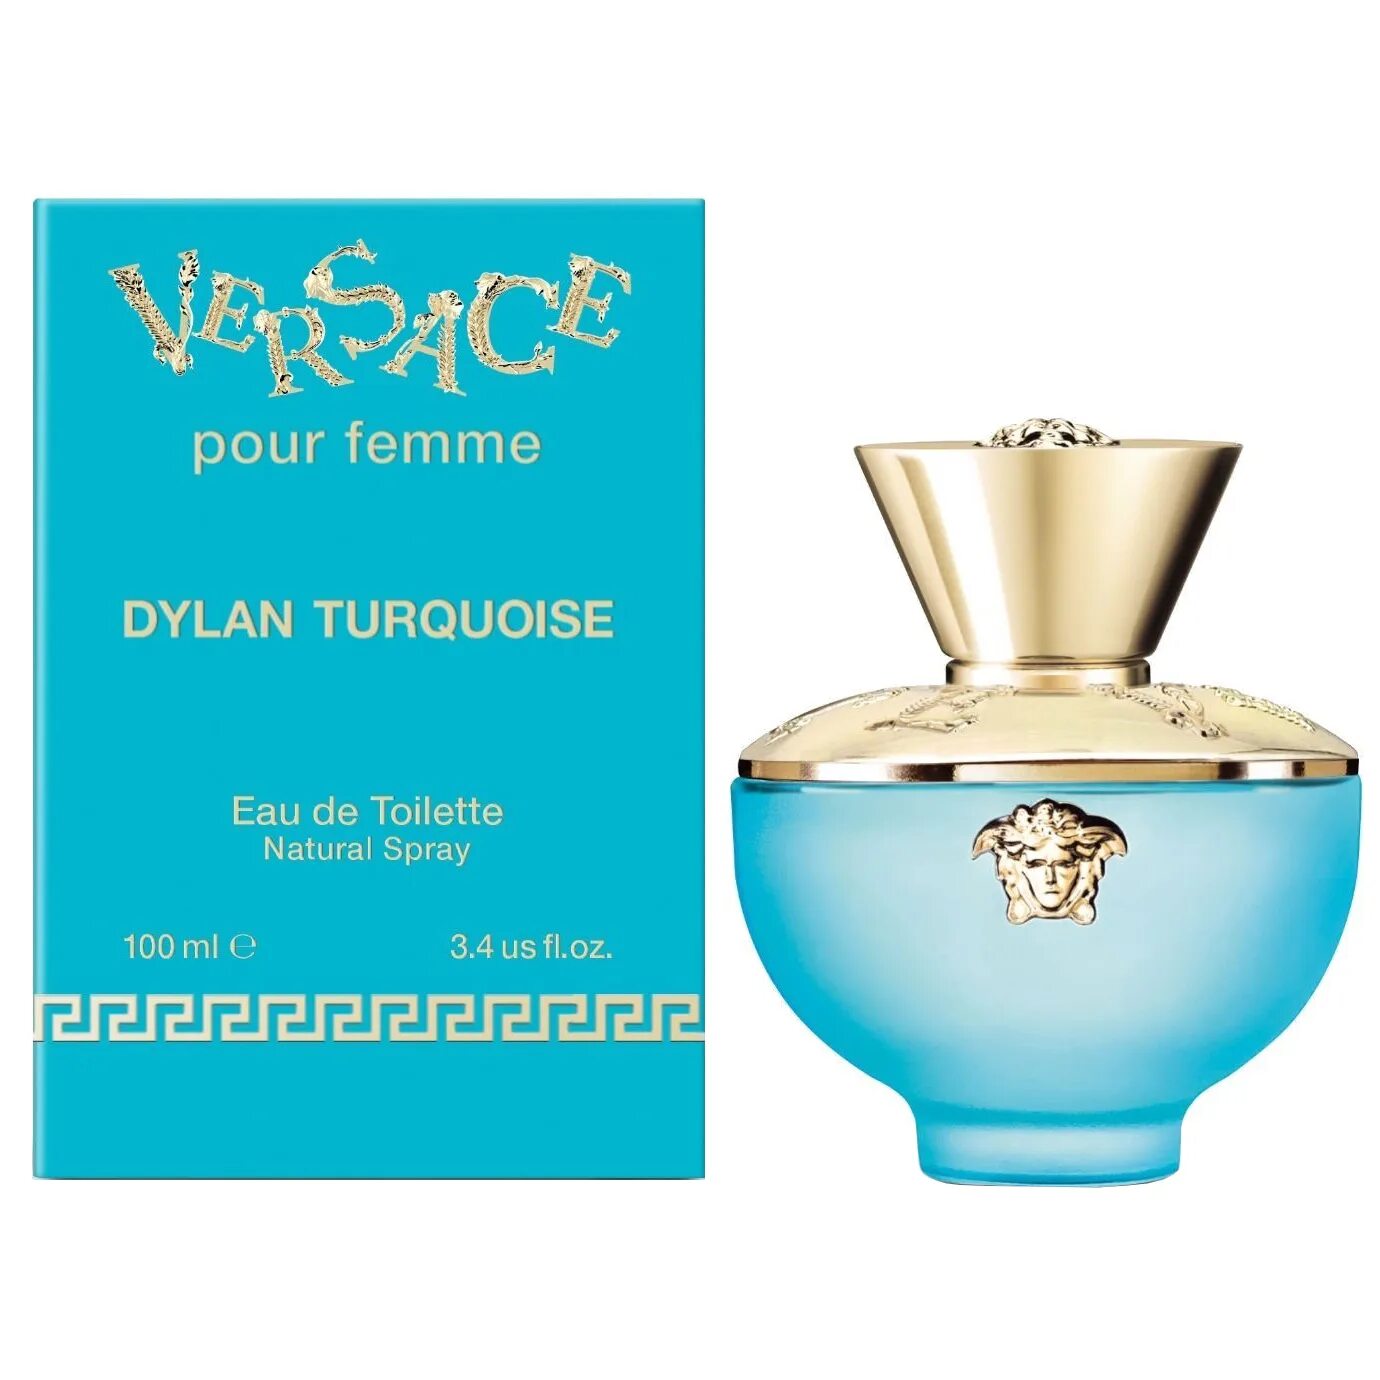 Духи Versace pour femme Dylan Turquoise. Духи Версаче женские Dylan Turquoise. Парфюмерная вода Версаче женская Дилан Блю. Versace Dylan Turquoise туалетная вода 100 мл.